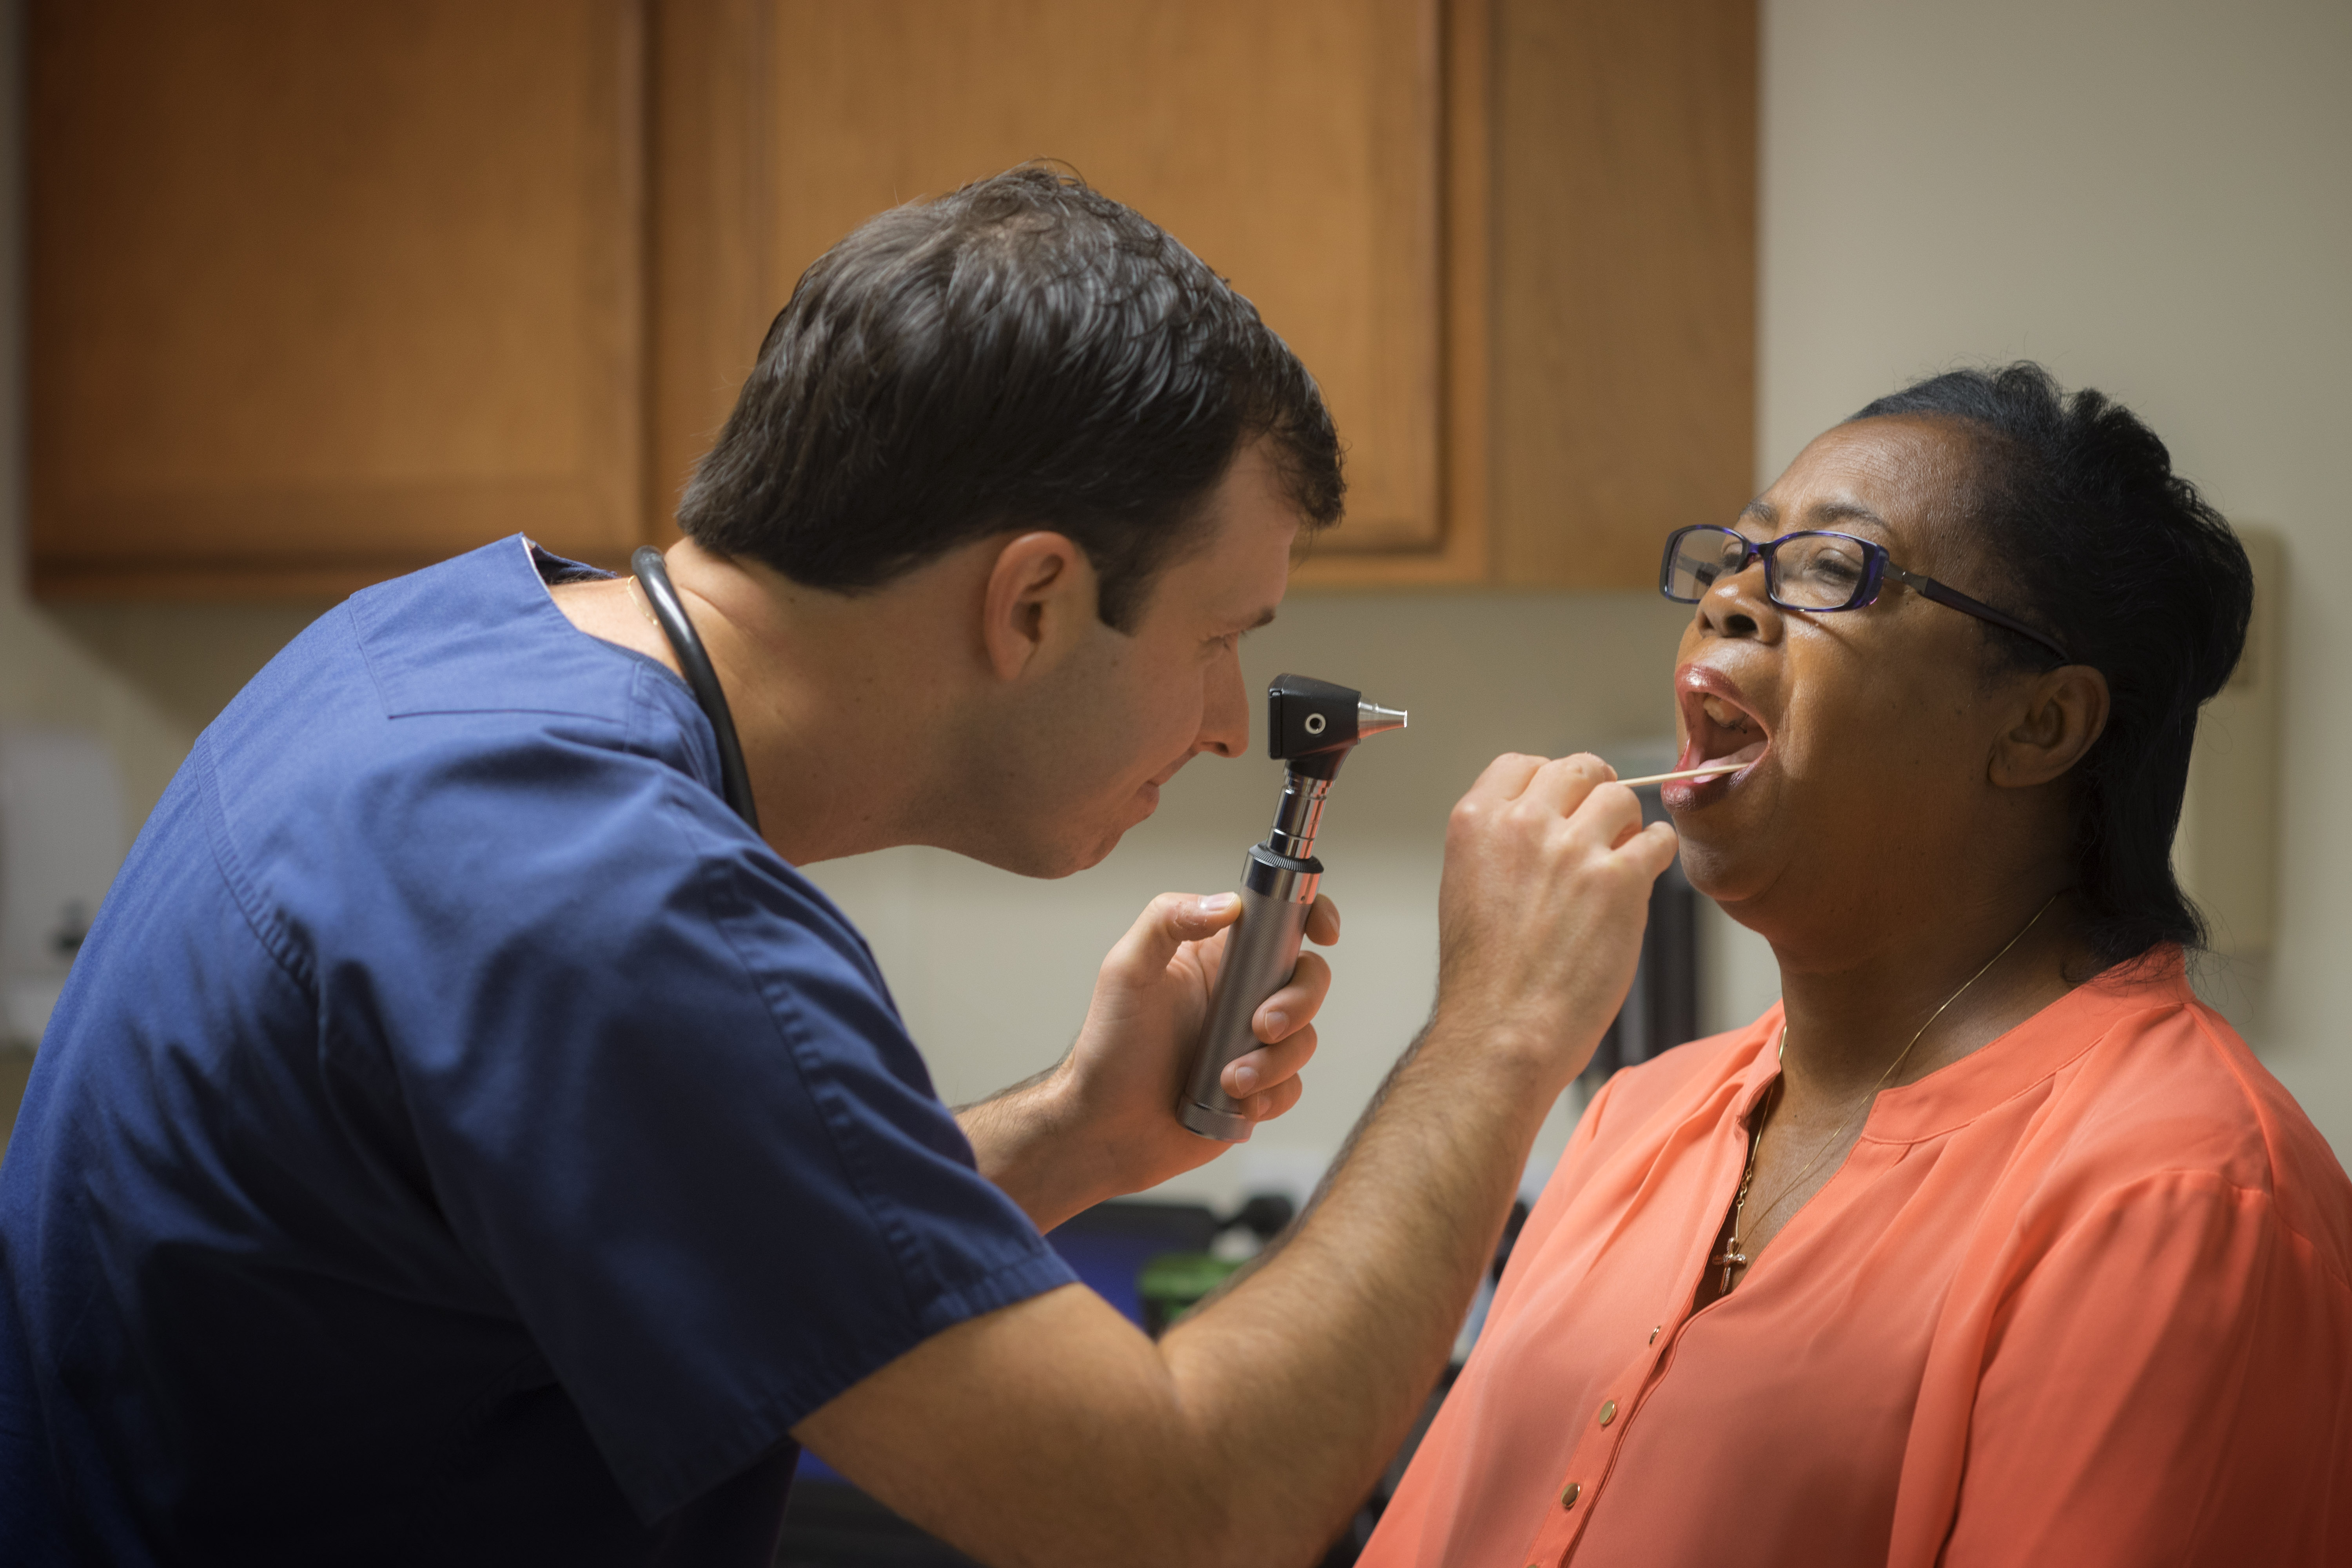 Elliot Myers examines a patient in his St. Landry Parish clinic. Myers earned his bachelor's, master's, and doctorate in nursing from UL Lafayette.